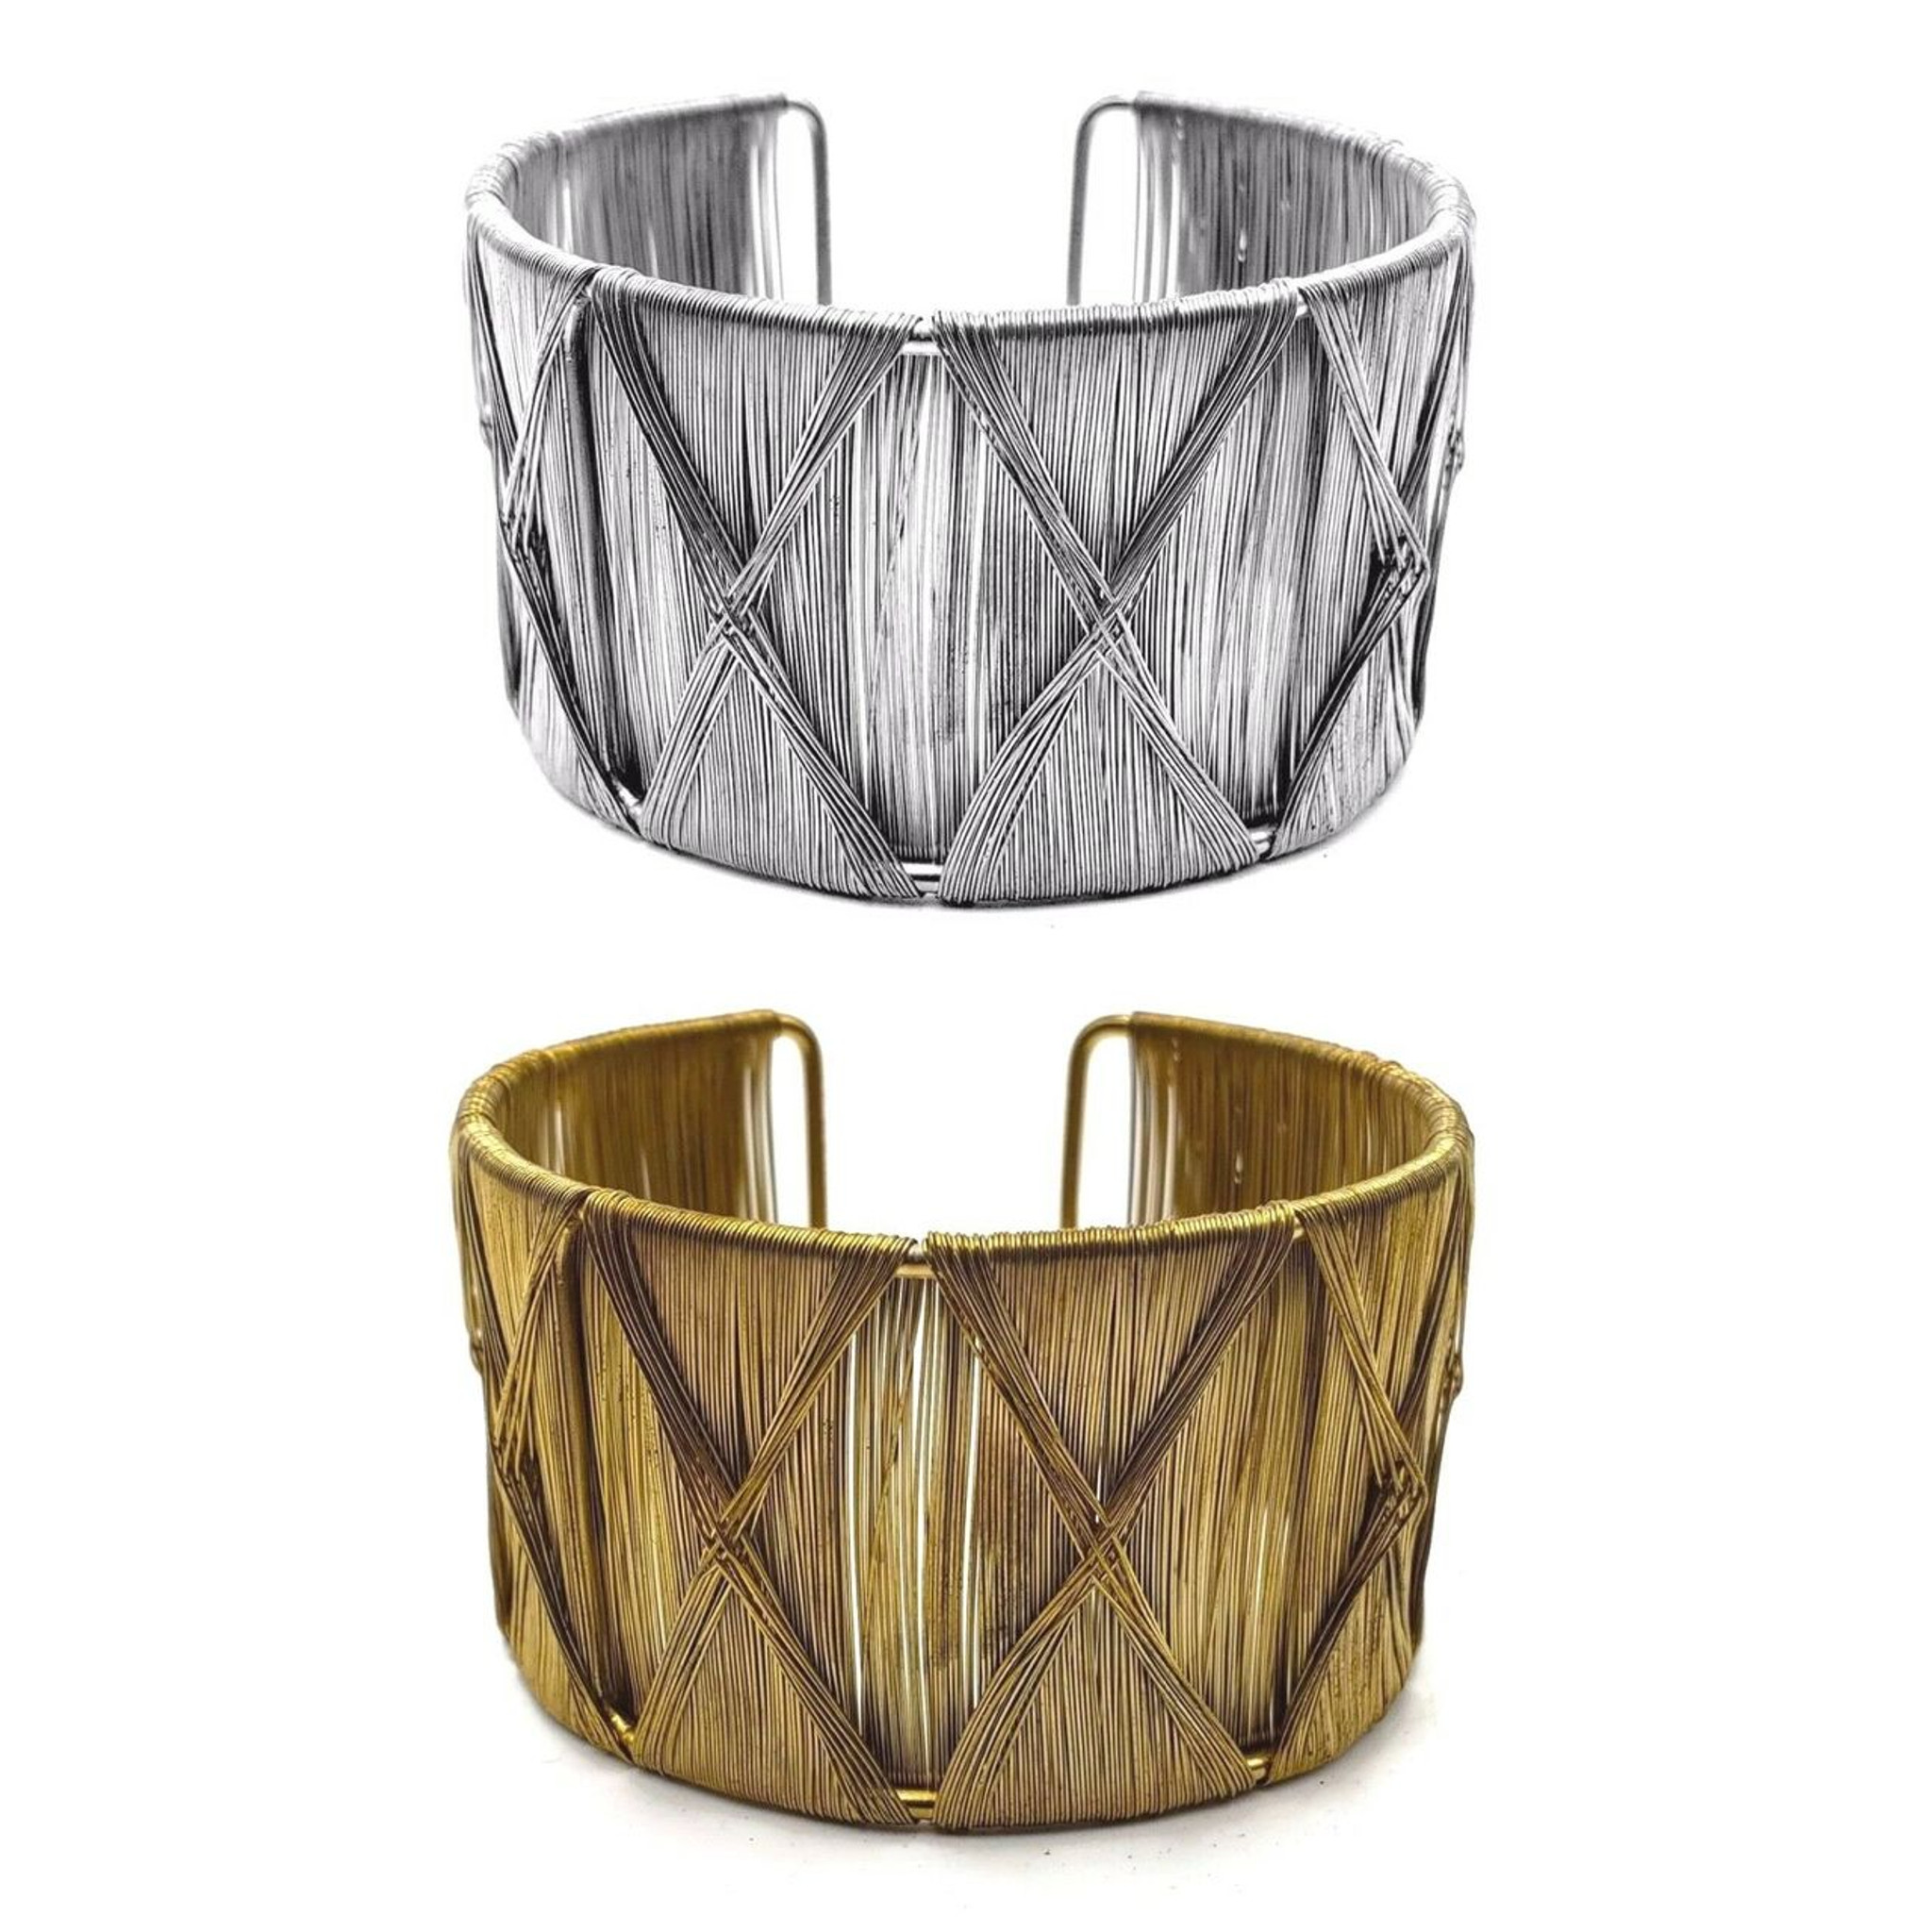 Lissa Criss Cross Brass Cuff in Silver and Gold